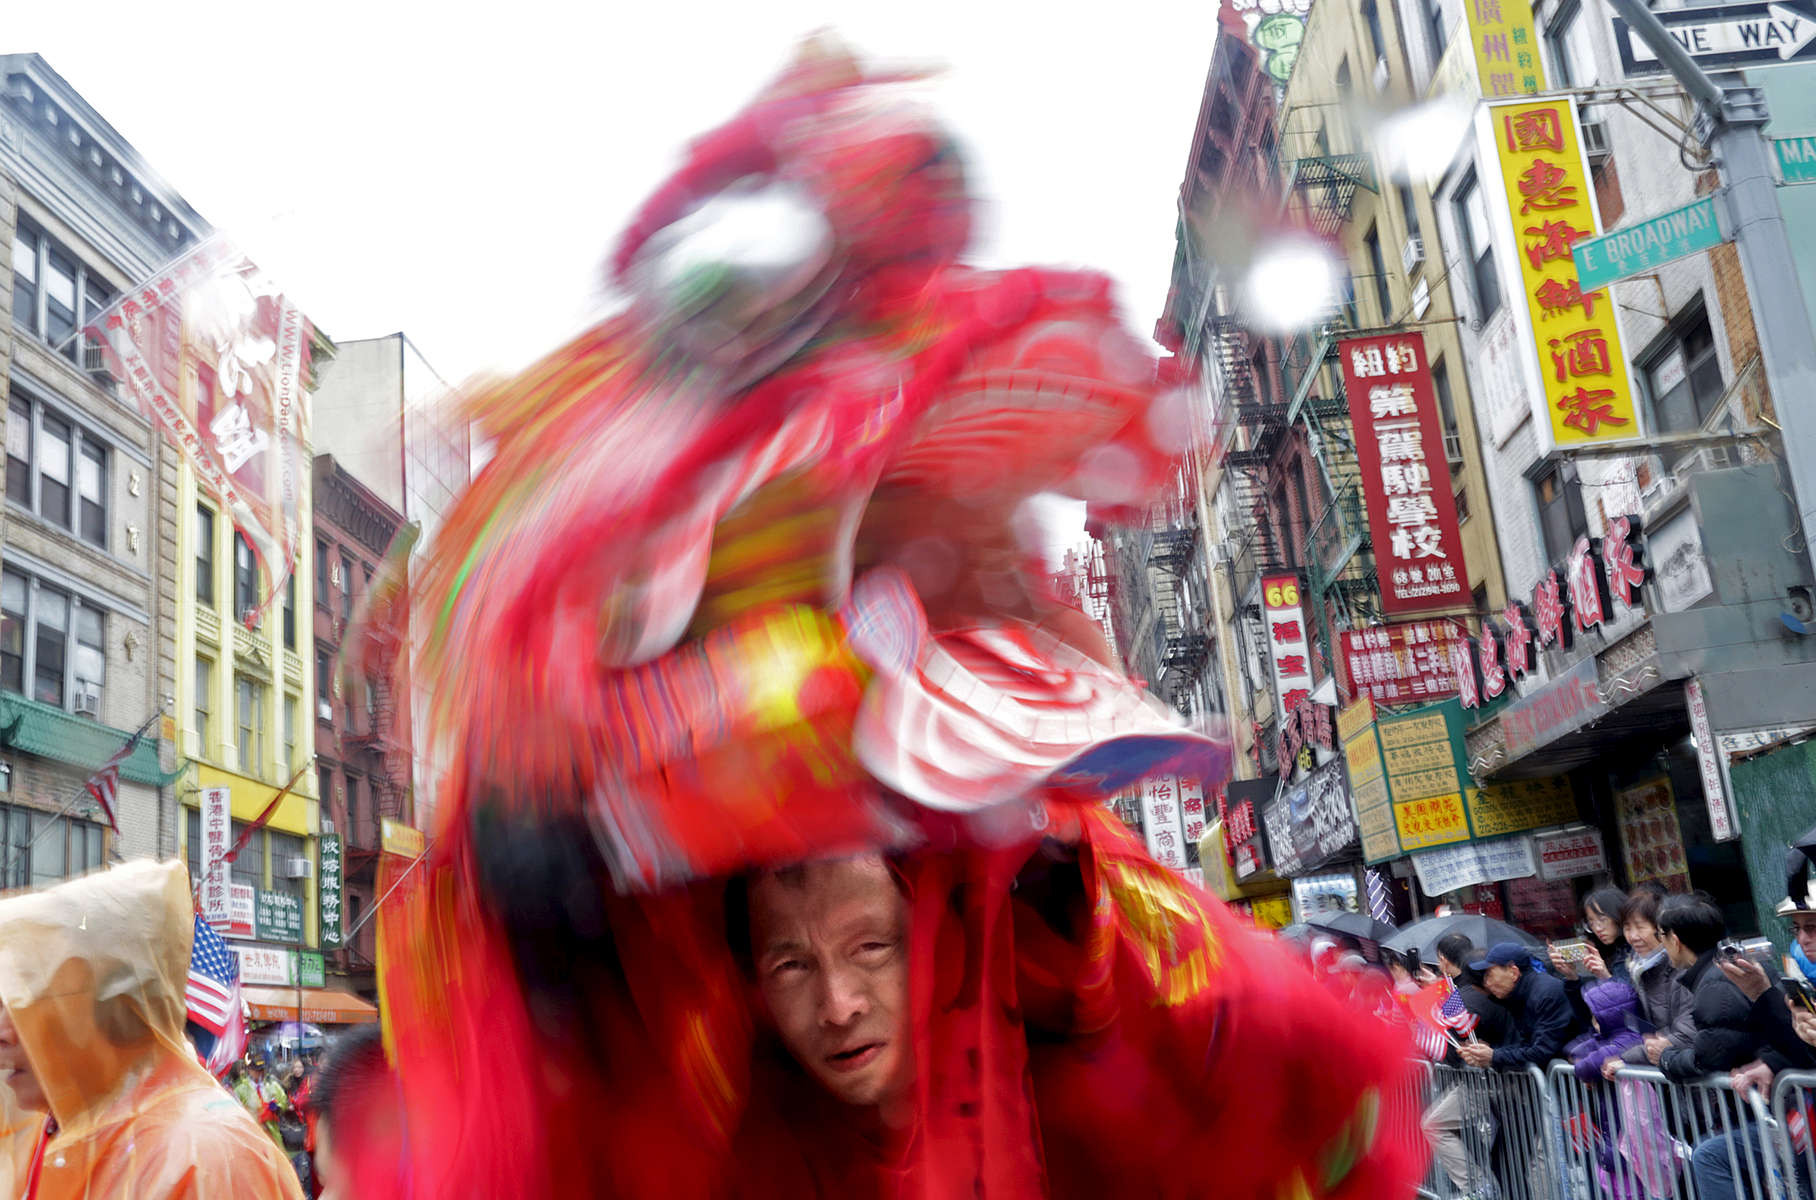 A participant in the Chinatown Lunar New Year Parade fiddles with his mask in Manhattan, NY on February 25, 2018.